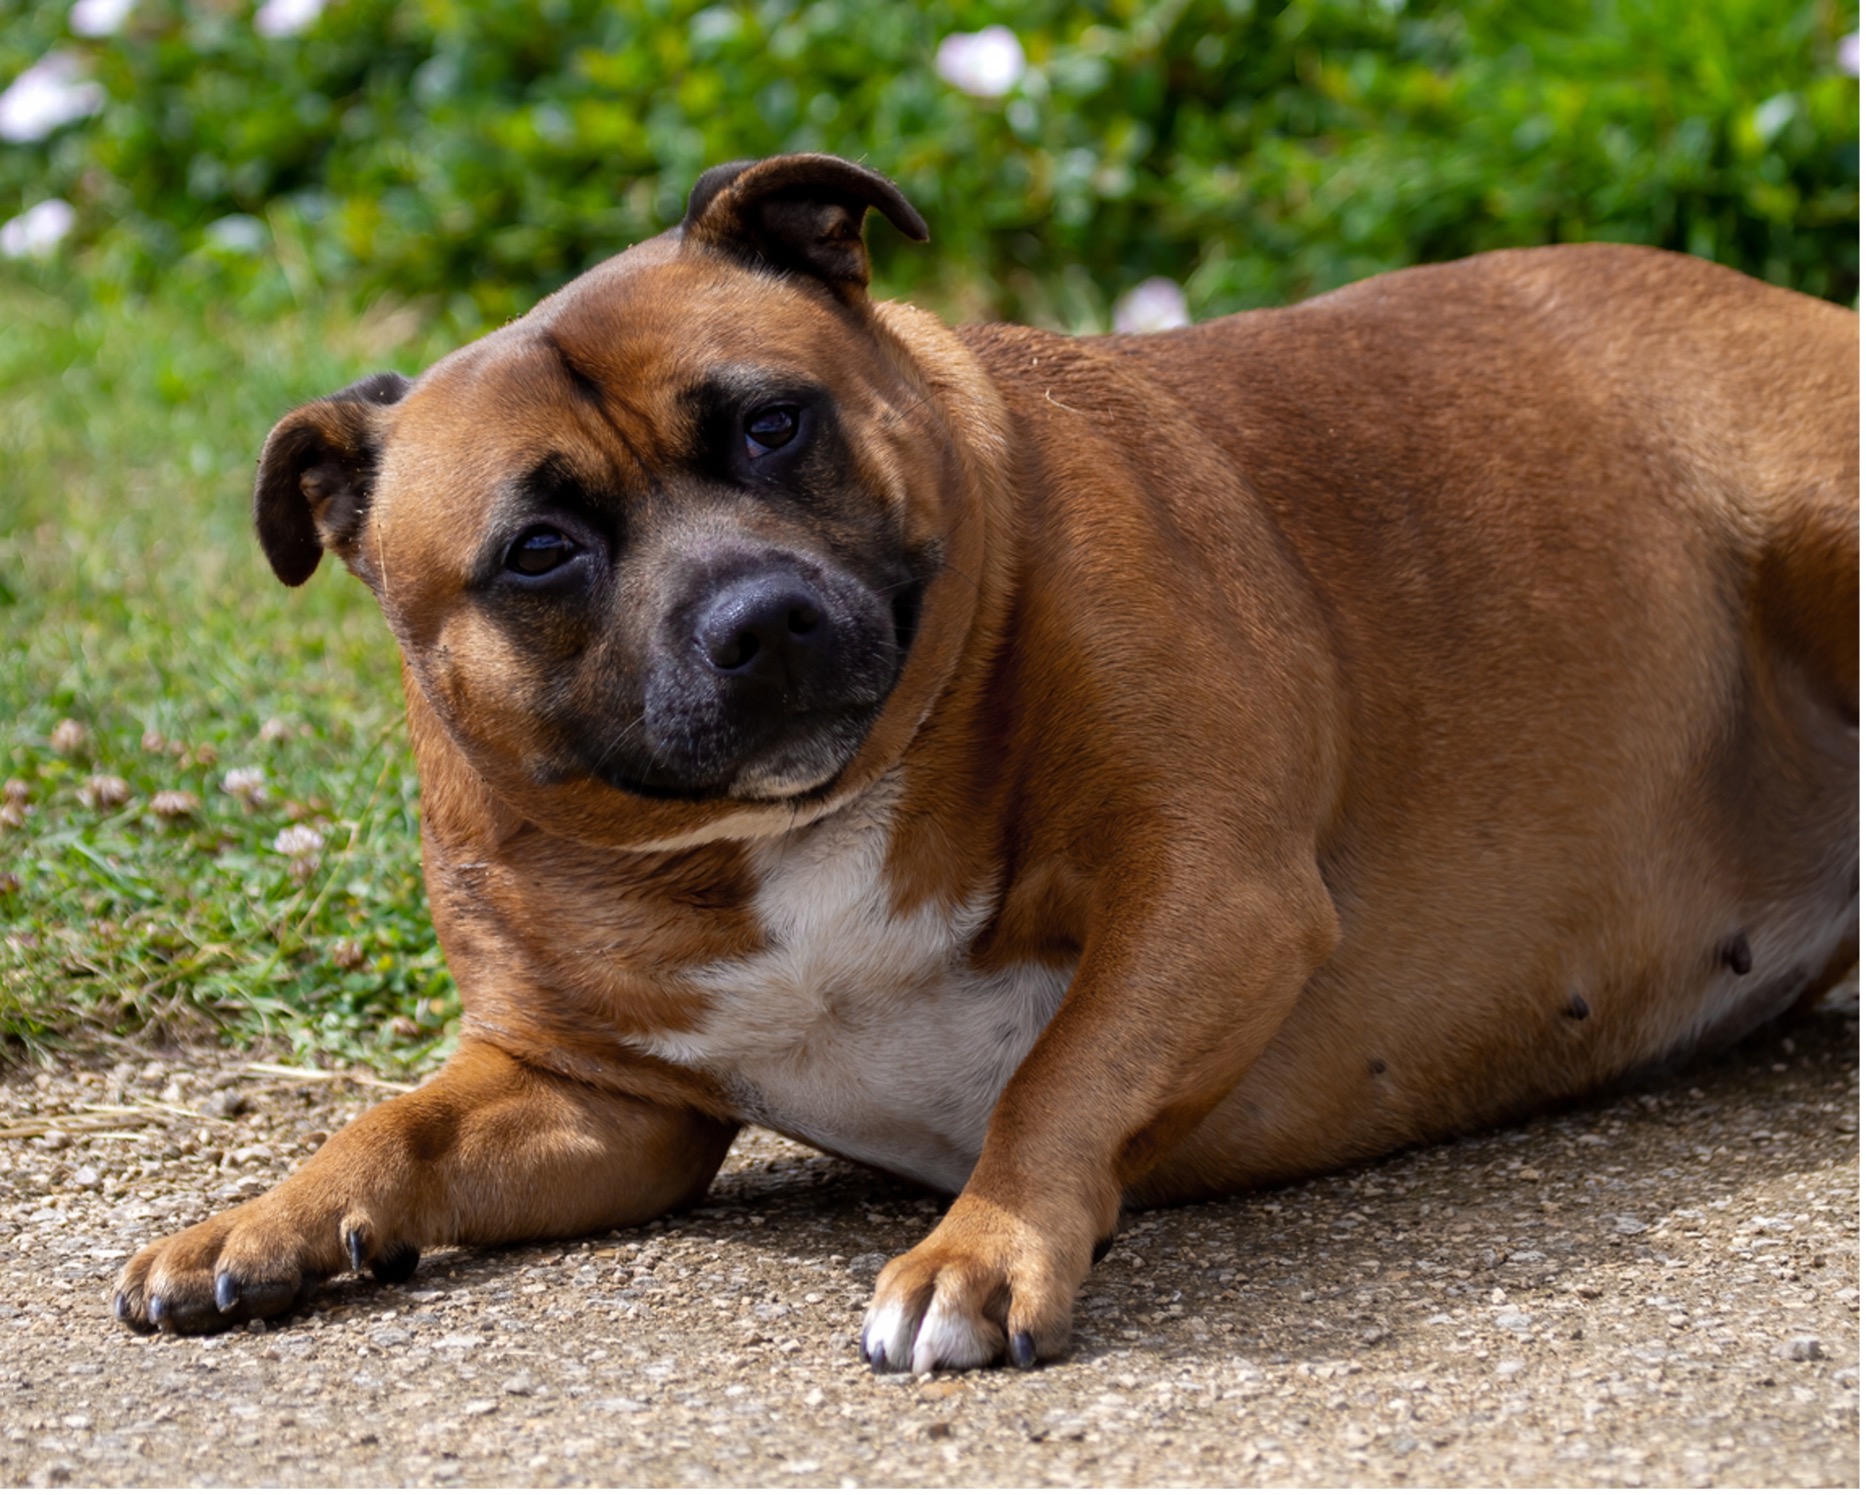 A fat dog lying on the ground, Keeping Your Furry Friends Fit: A Guide to Preventing Pet Obesity